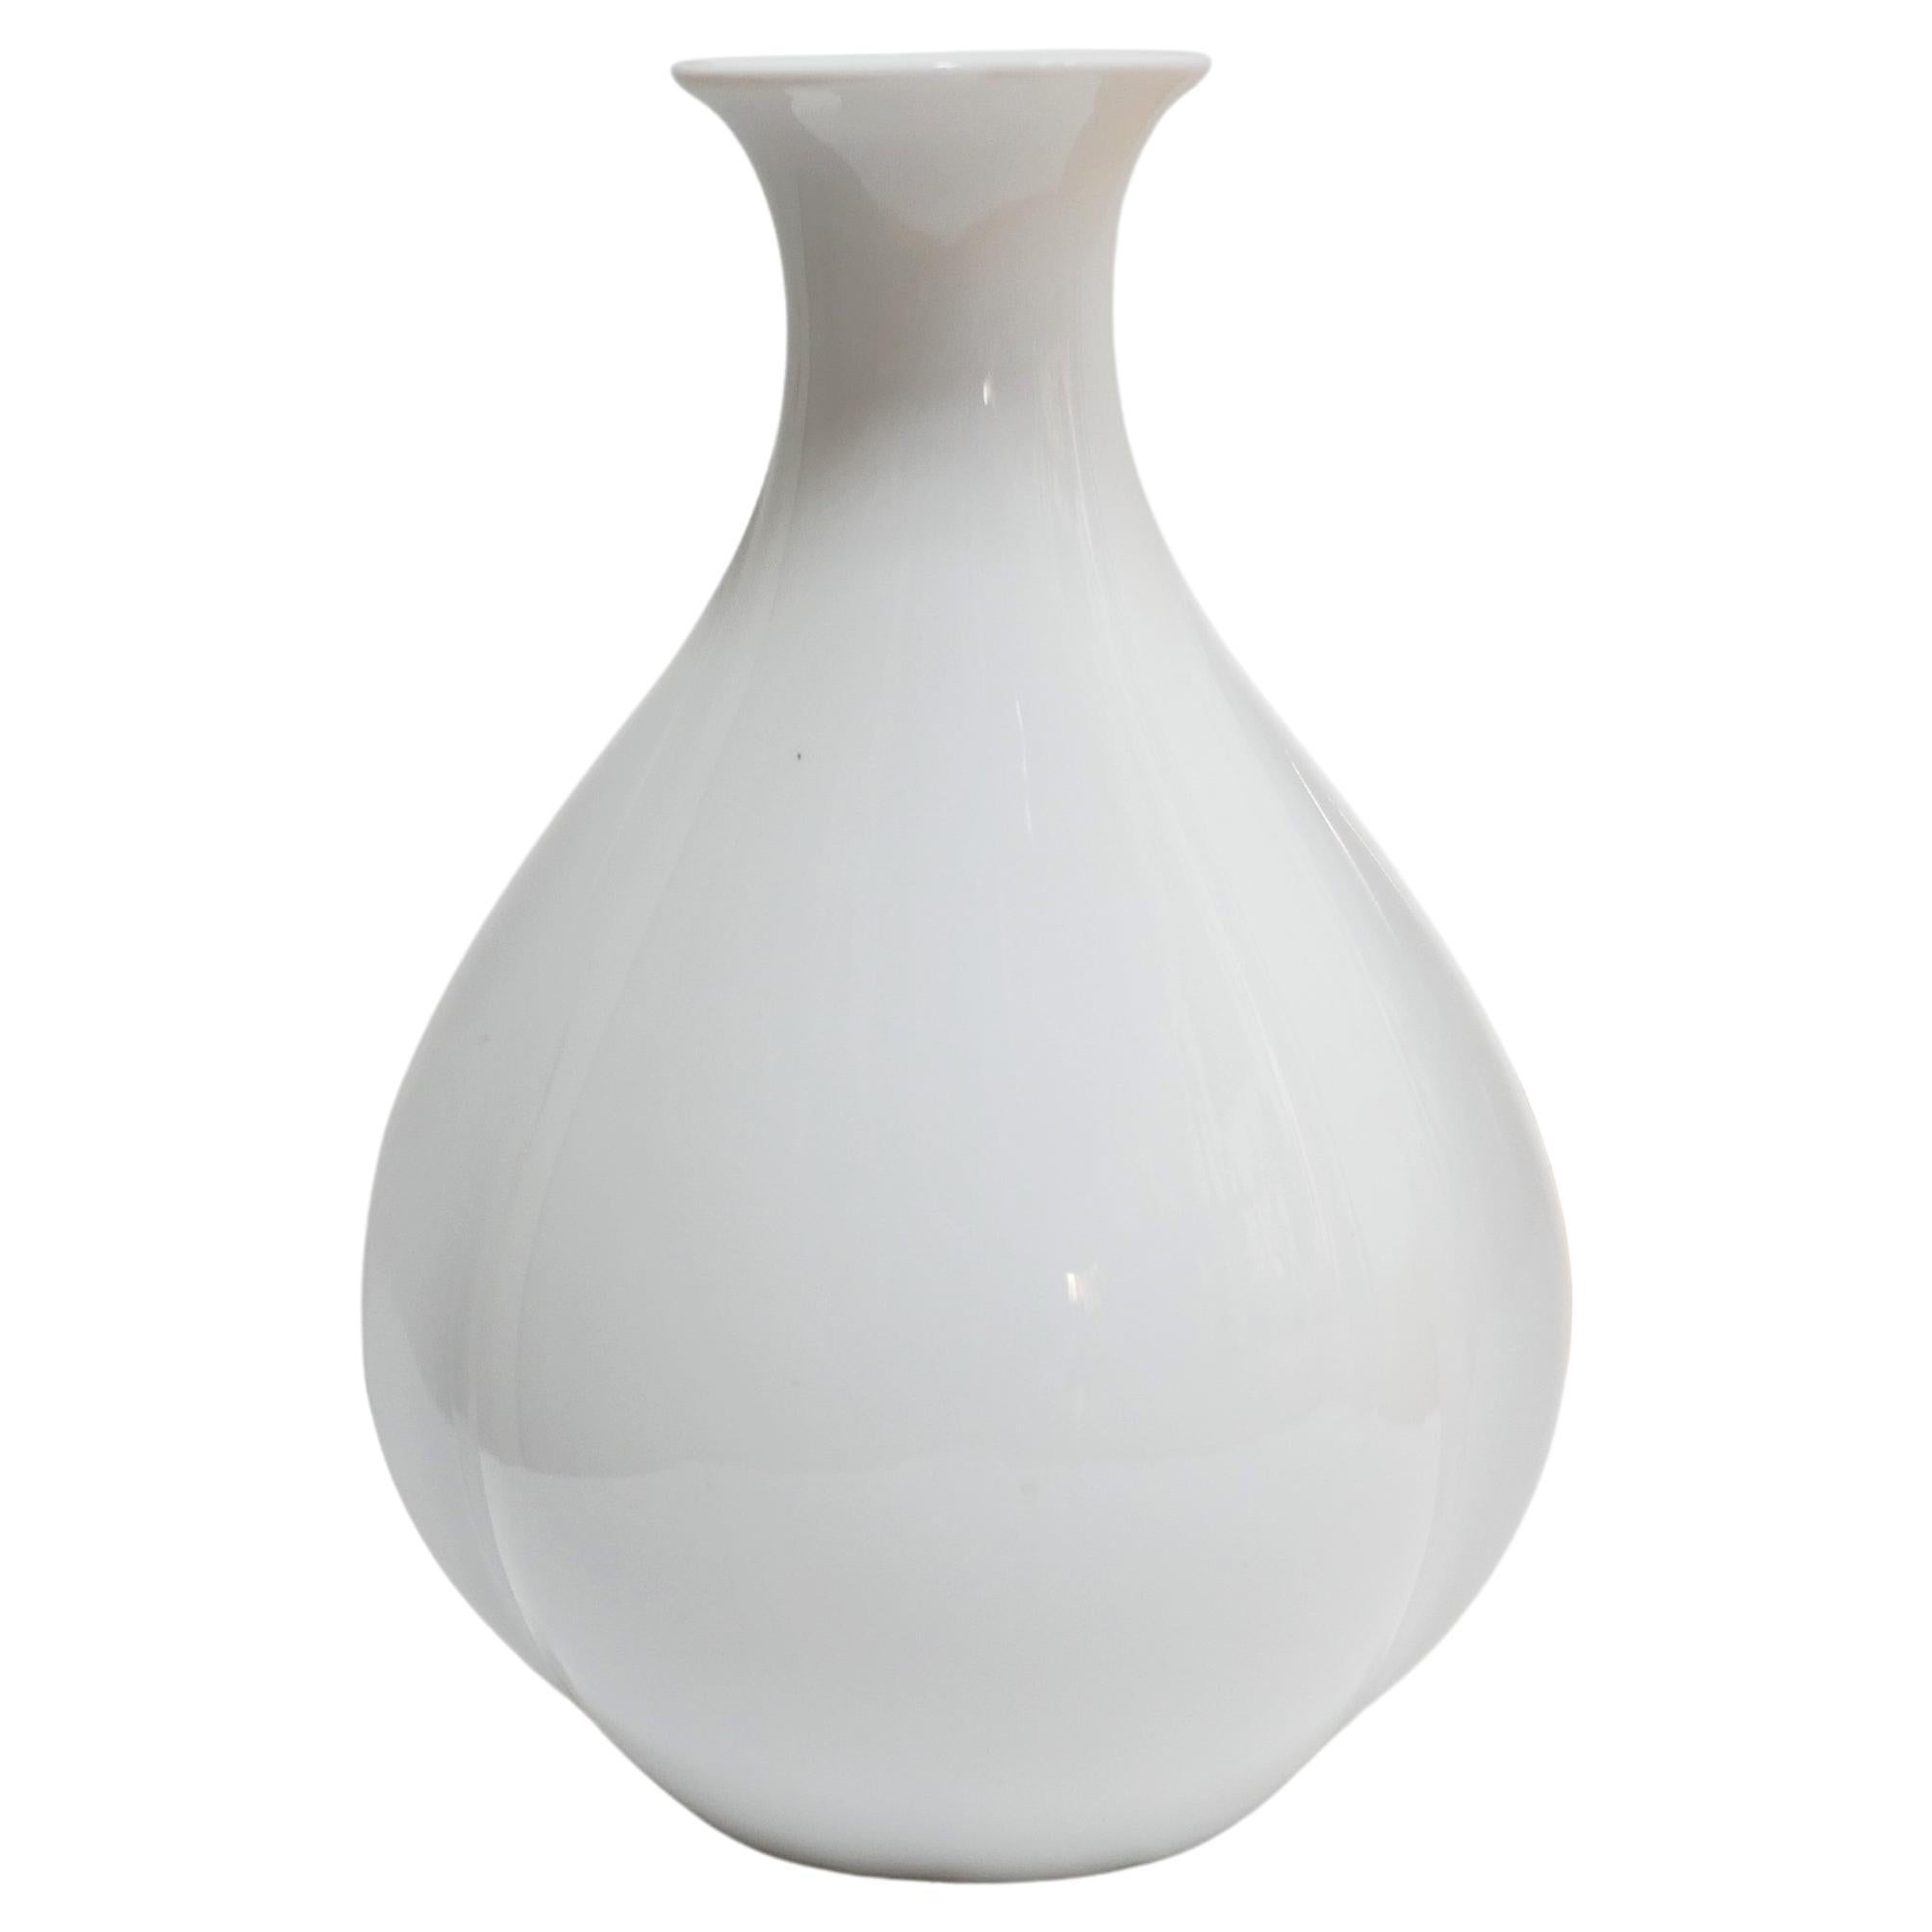 Vintage White Porcelain Vase by the Seltmann Weiden Factory, Germany